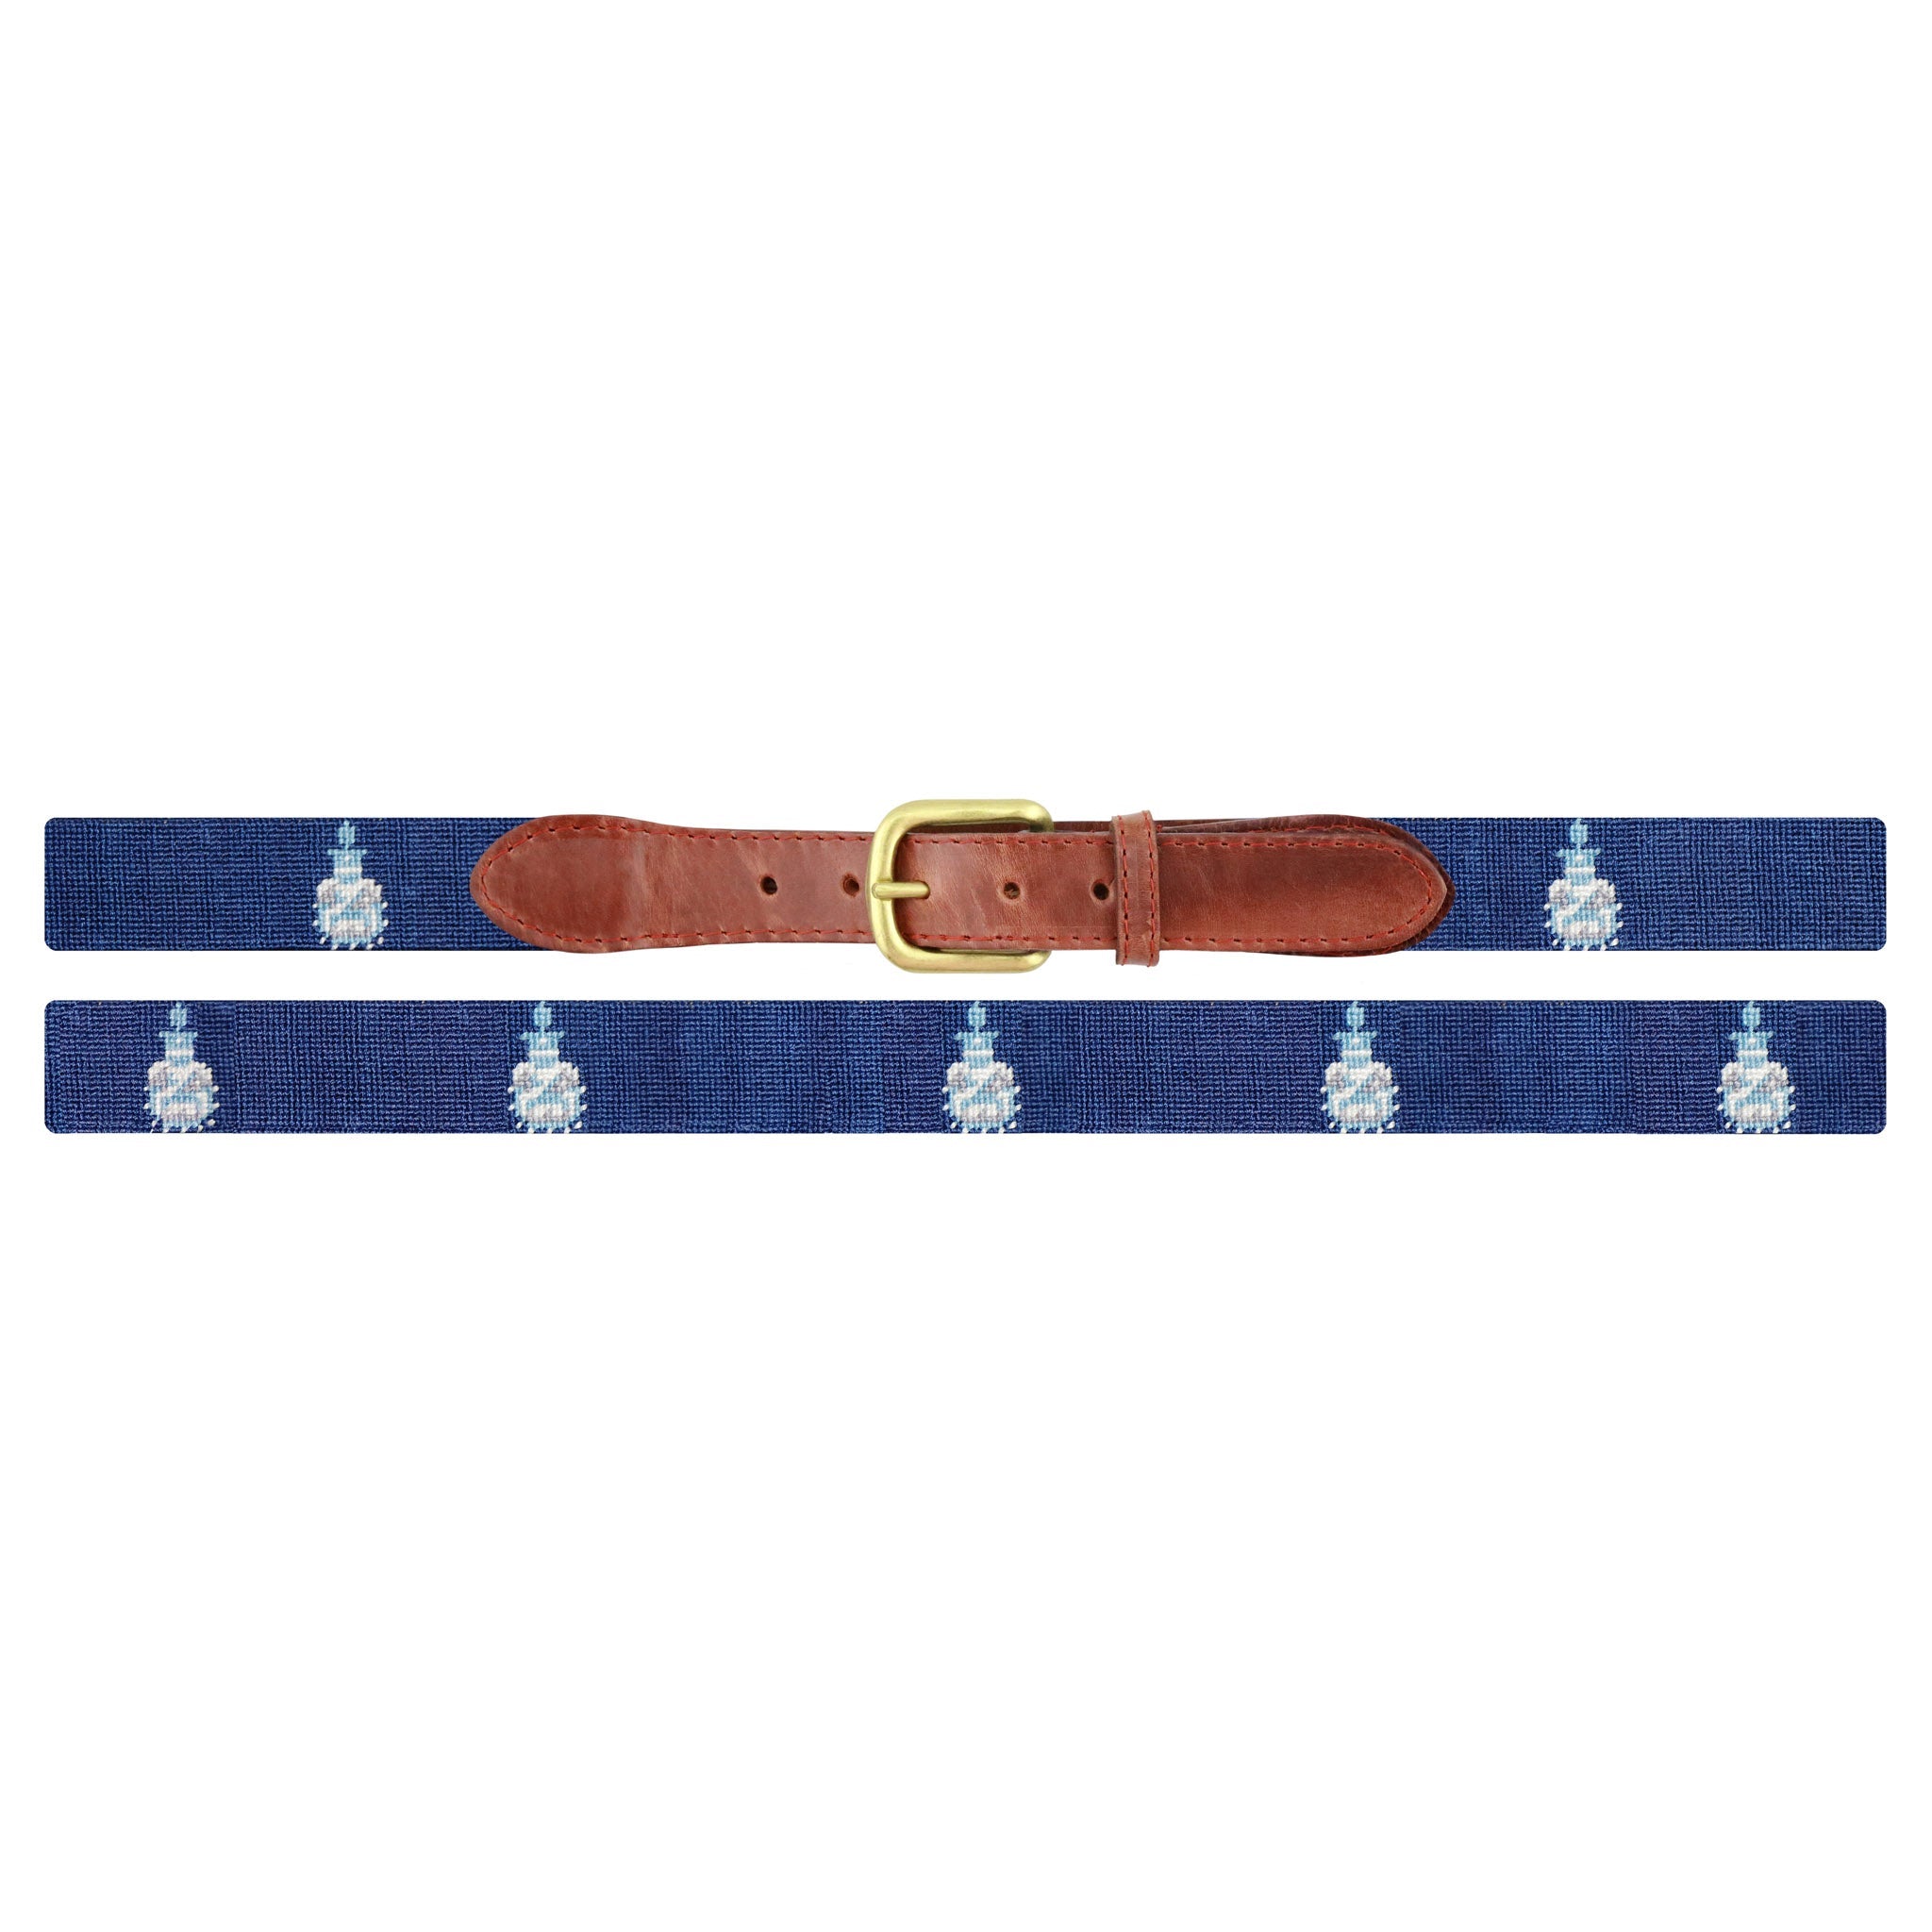 Smathers and Branson Citadel Needlepoint Belt Laid Out 